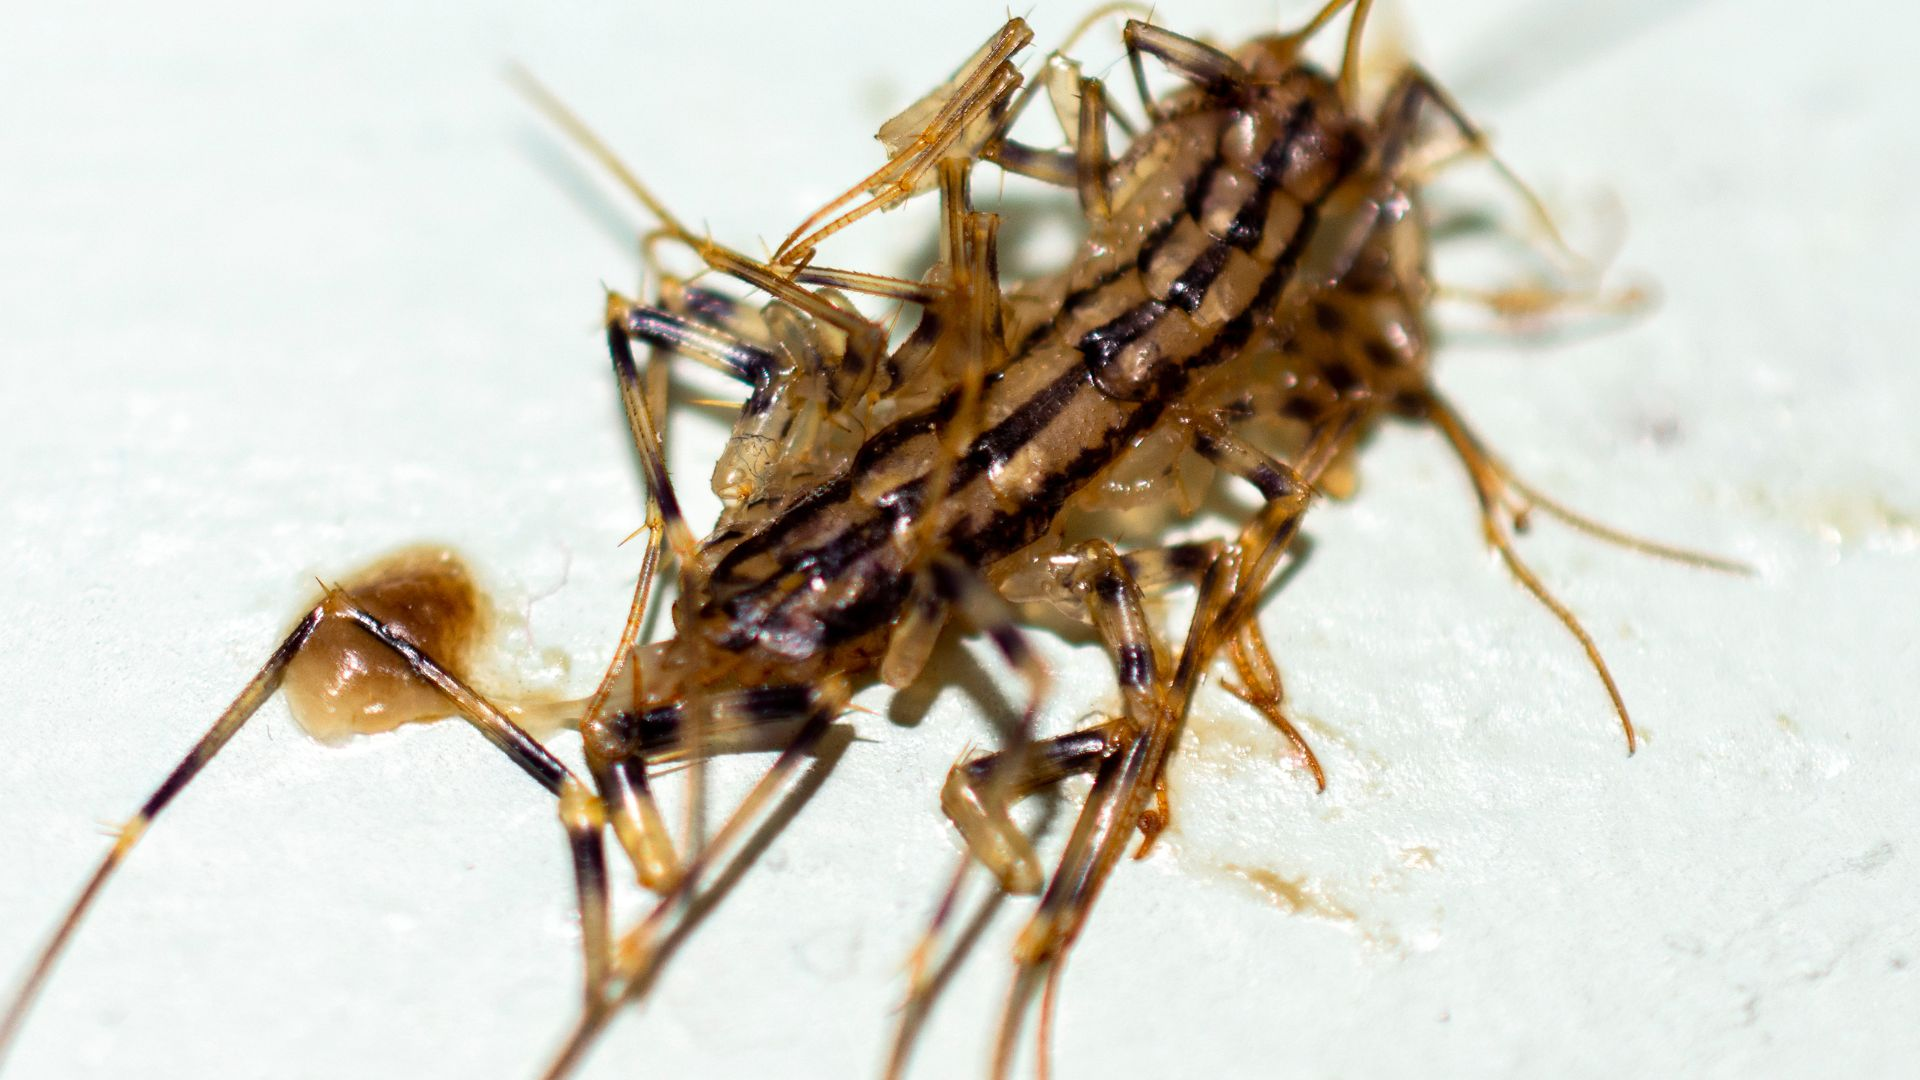 An image of a centipede stuck to a sticky glue trap.